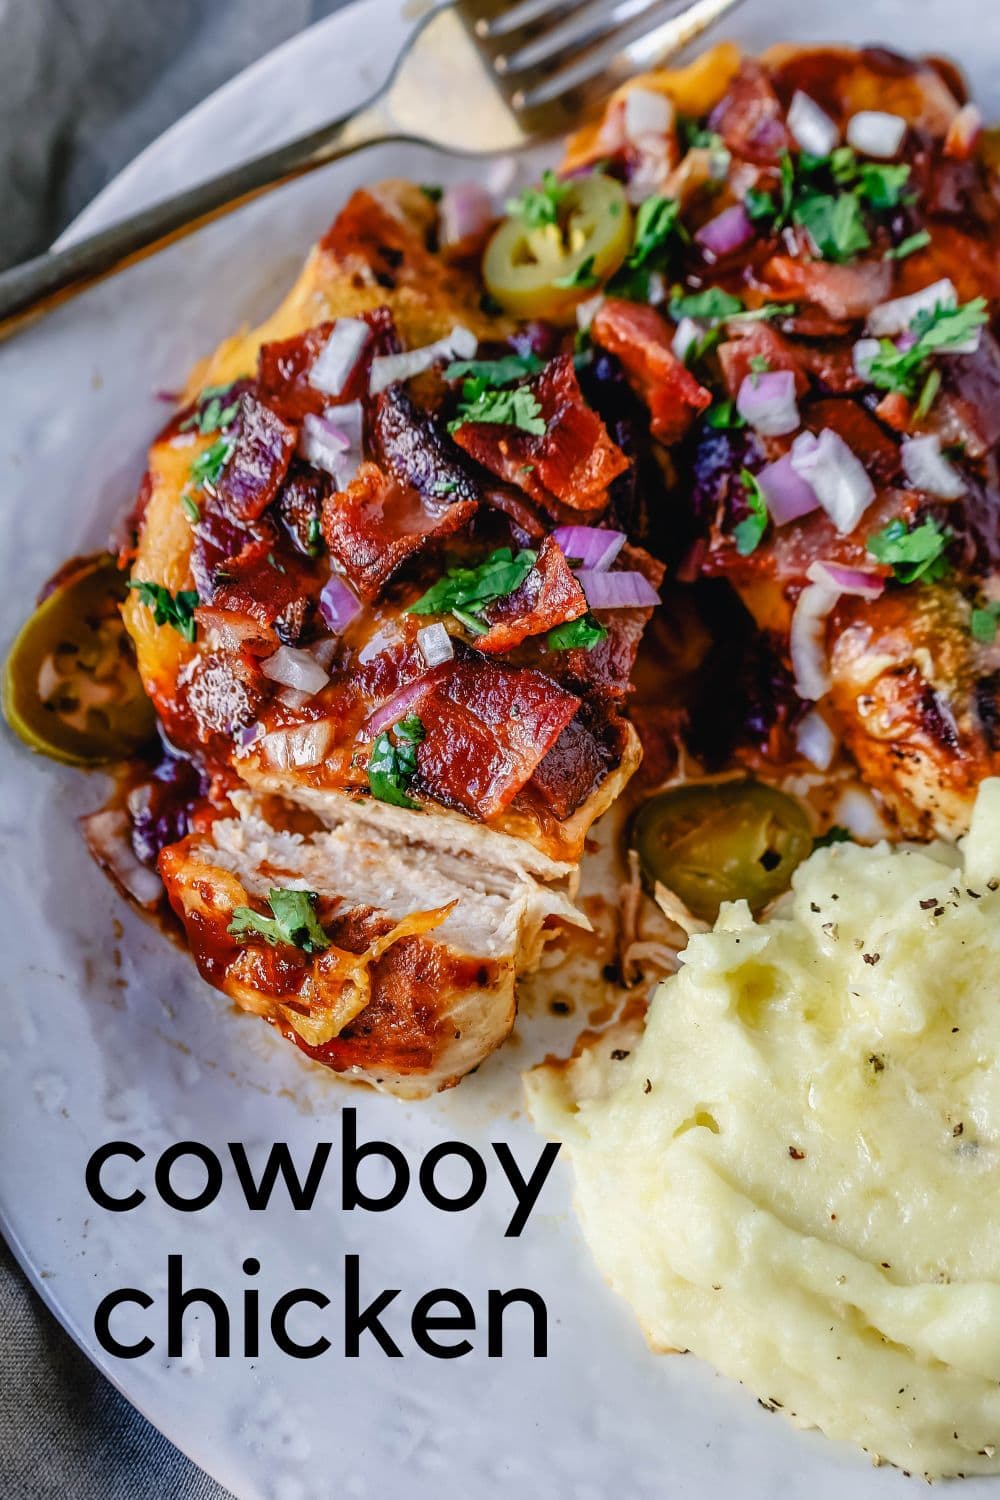 This Cowboy Chicken is Marinated Grilled Chicken topped with BBQ Sauce, Crispy Bacon, and Cheddar Cheese. Top with Fresh Cilantro and Red Onion. This is the best Monterey Chicken recipe!